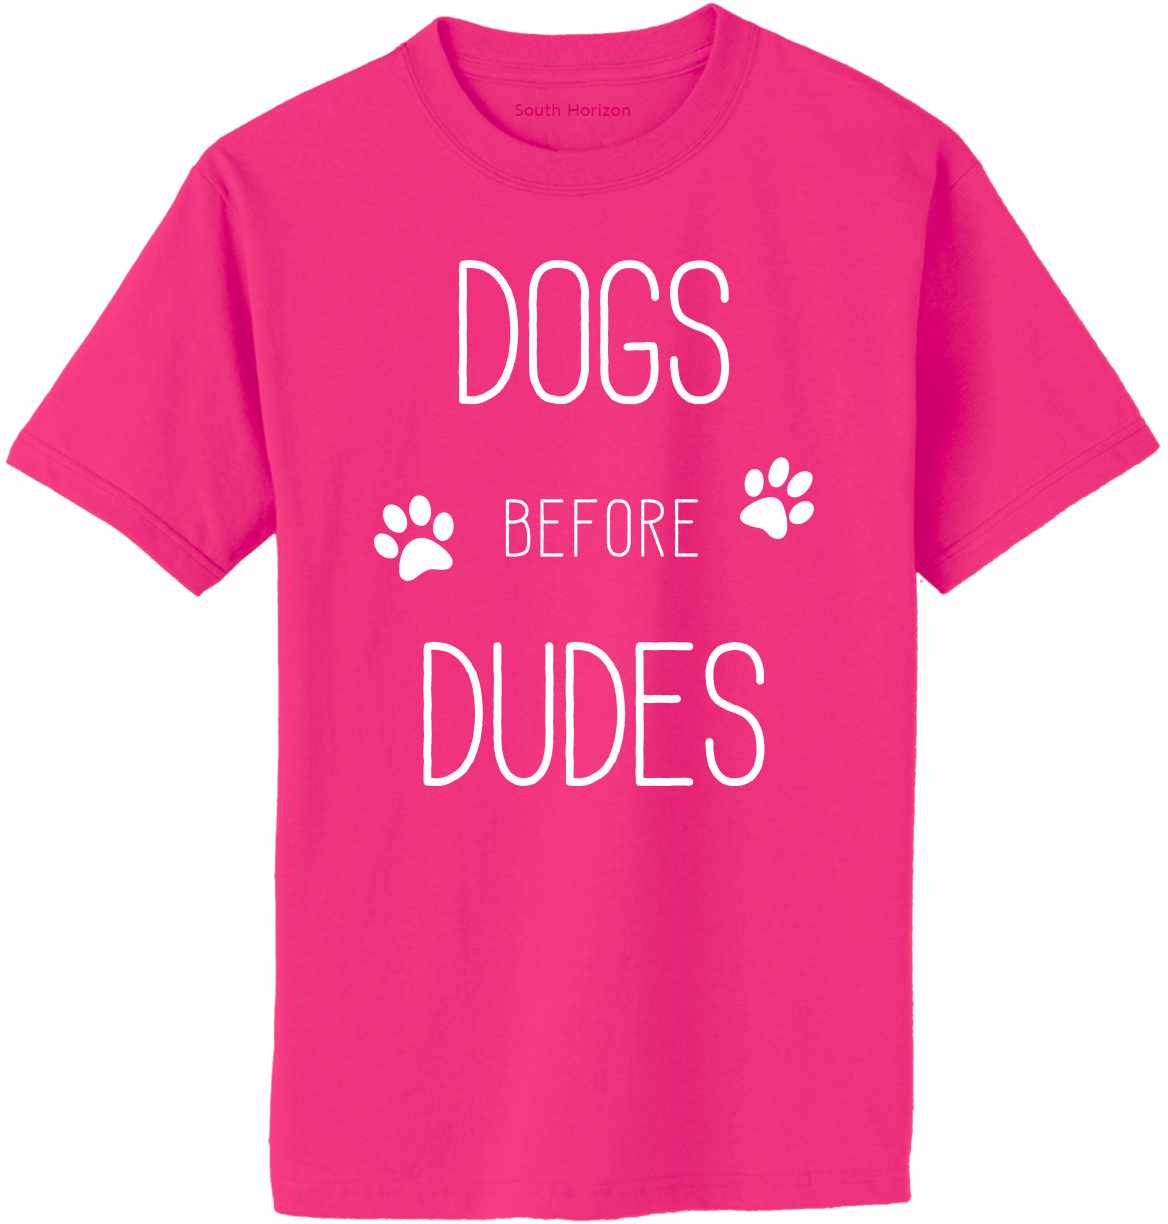 Dogs Before Dudes Adult T-Shirt (#1013-1)